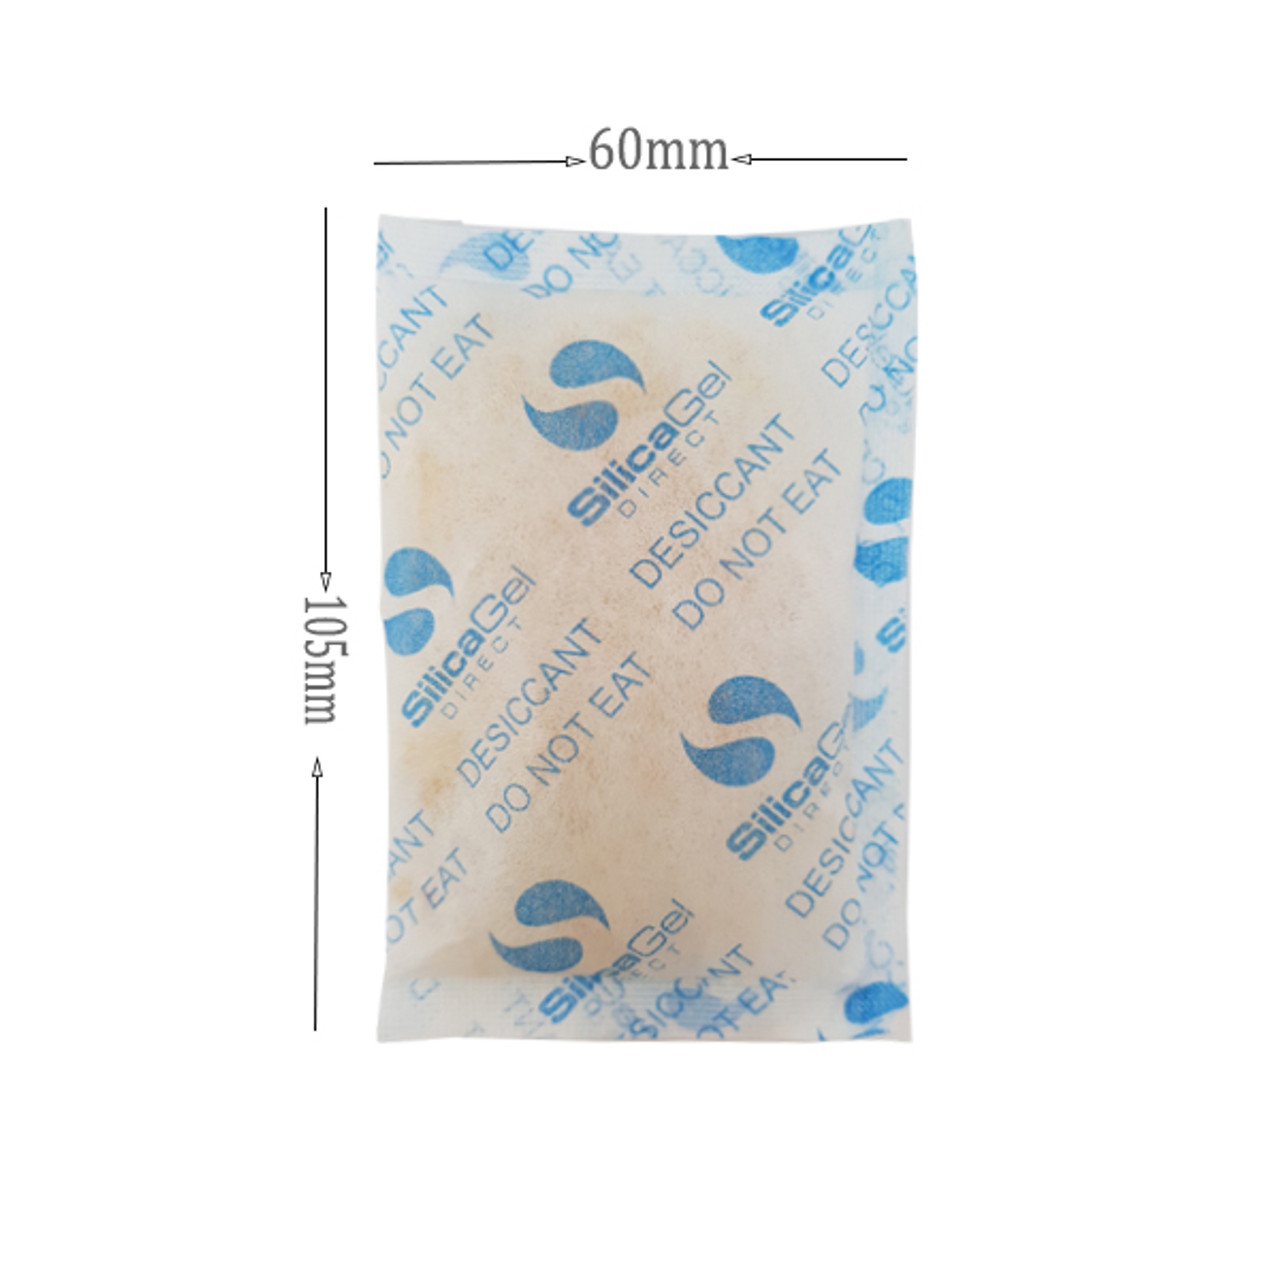 25gm Silica Gel Moisture Absorber Desiccant Indicating Orange/White Packets 